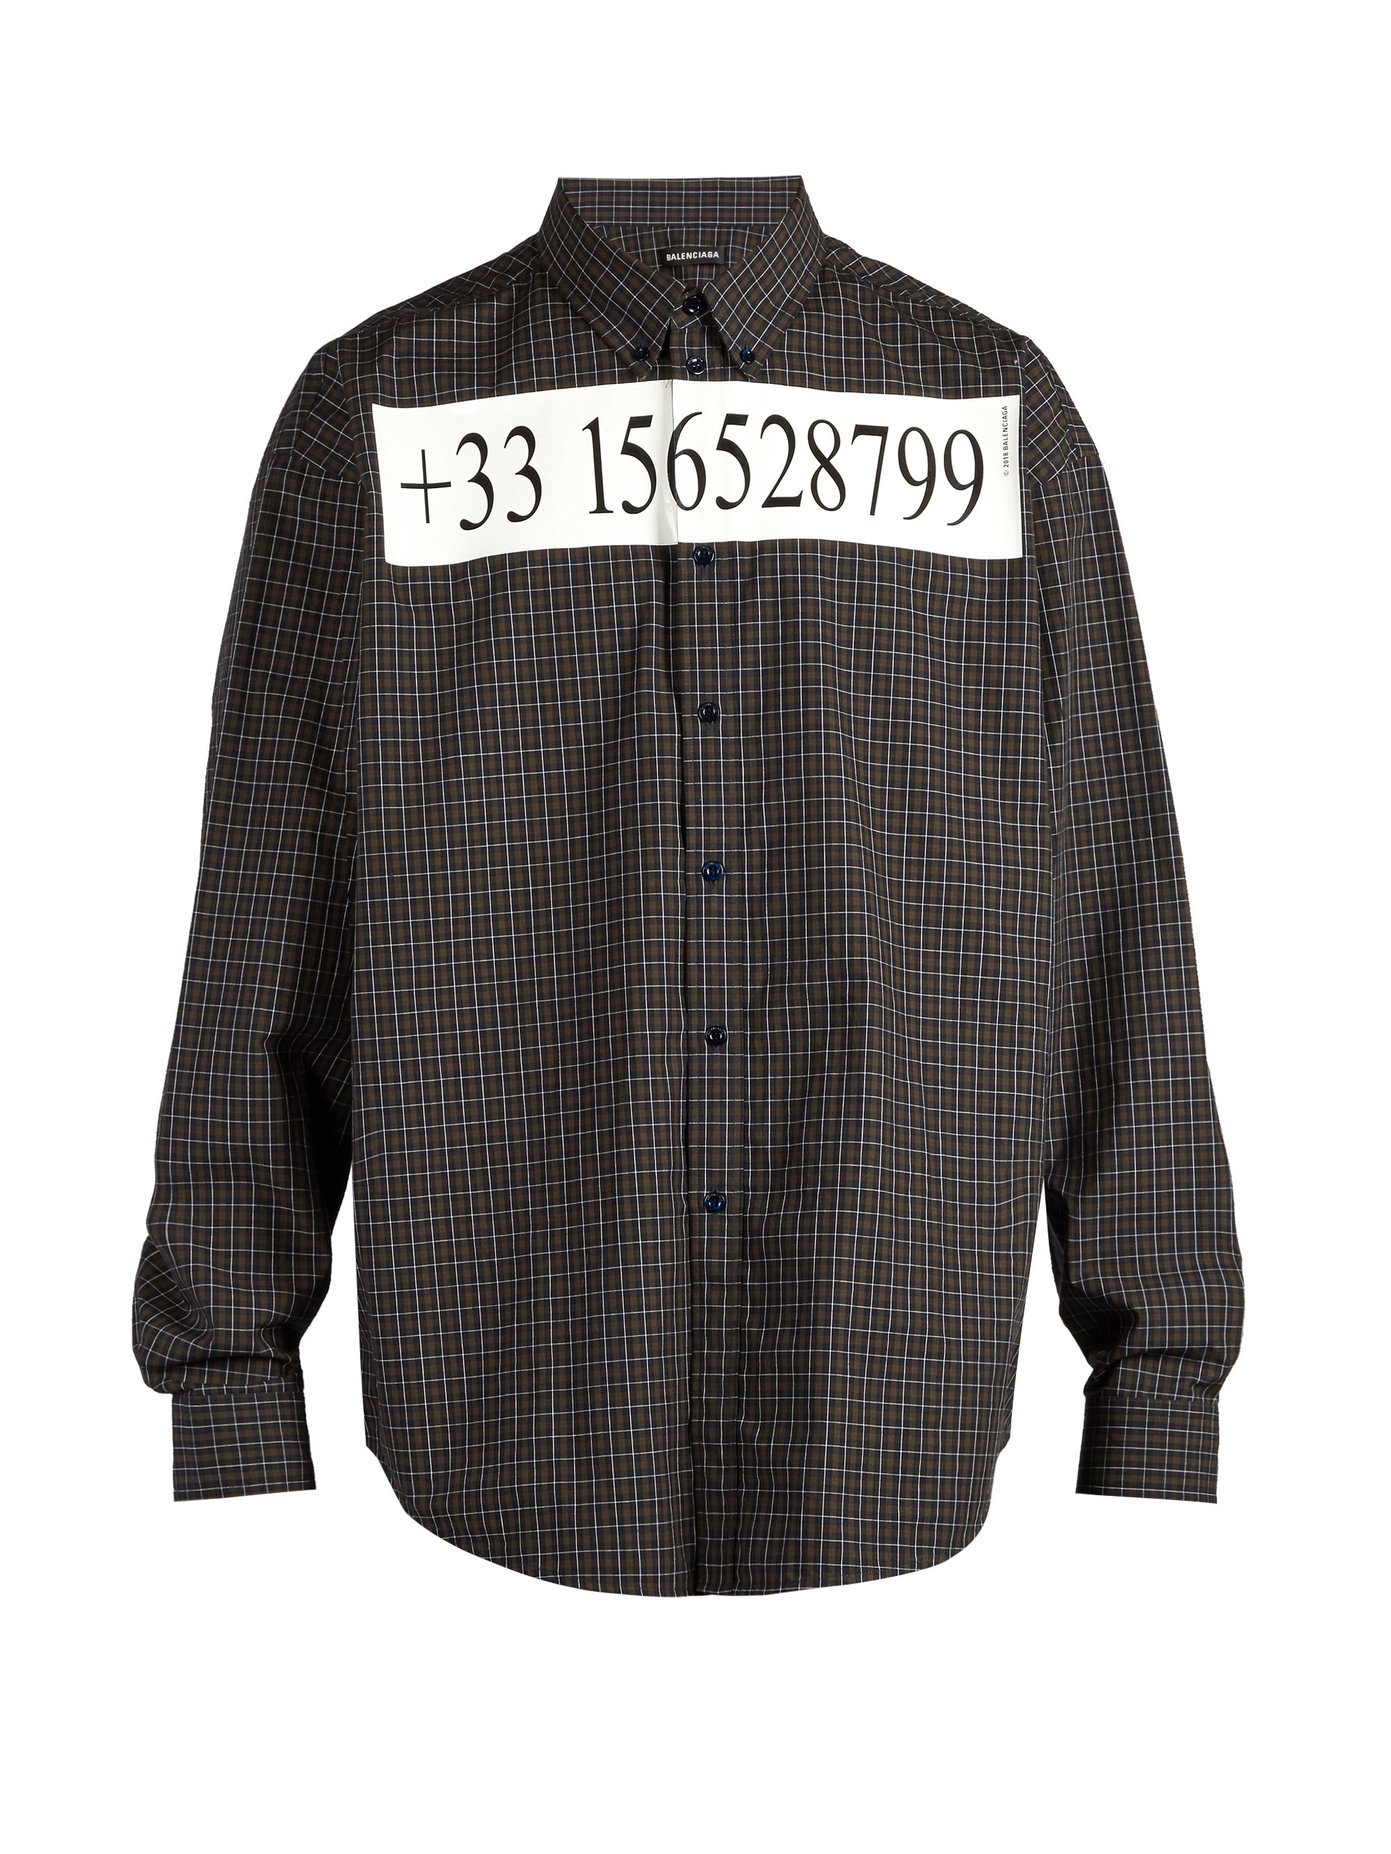 Telephone number-print checked shirt 